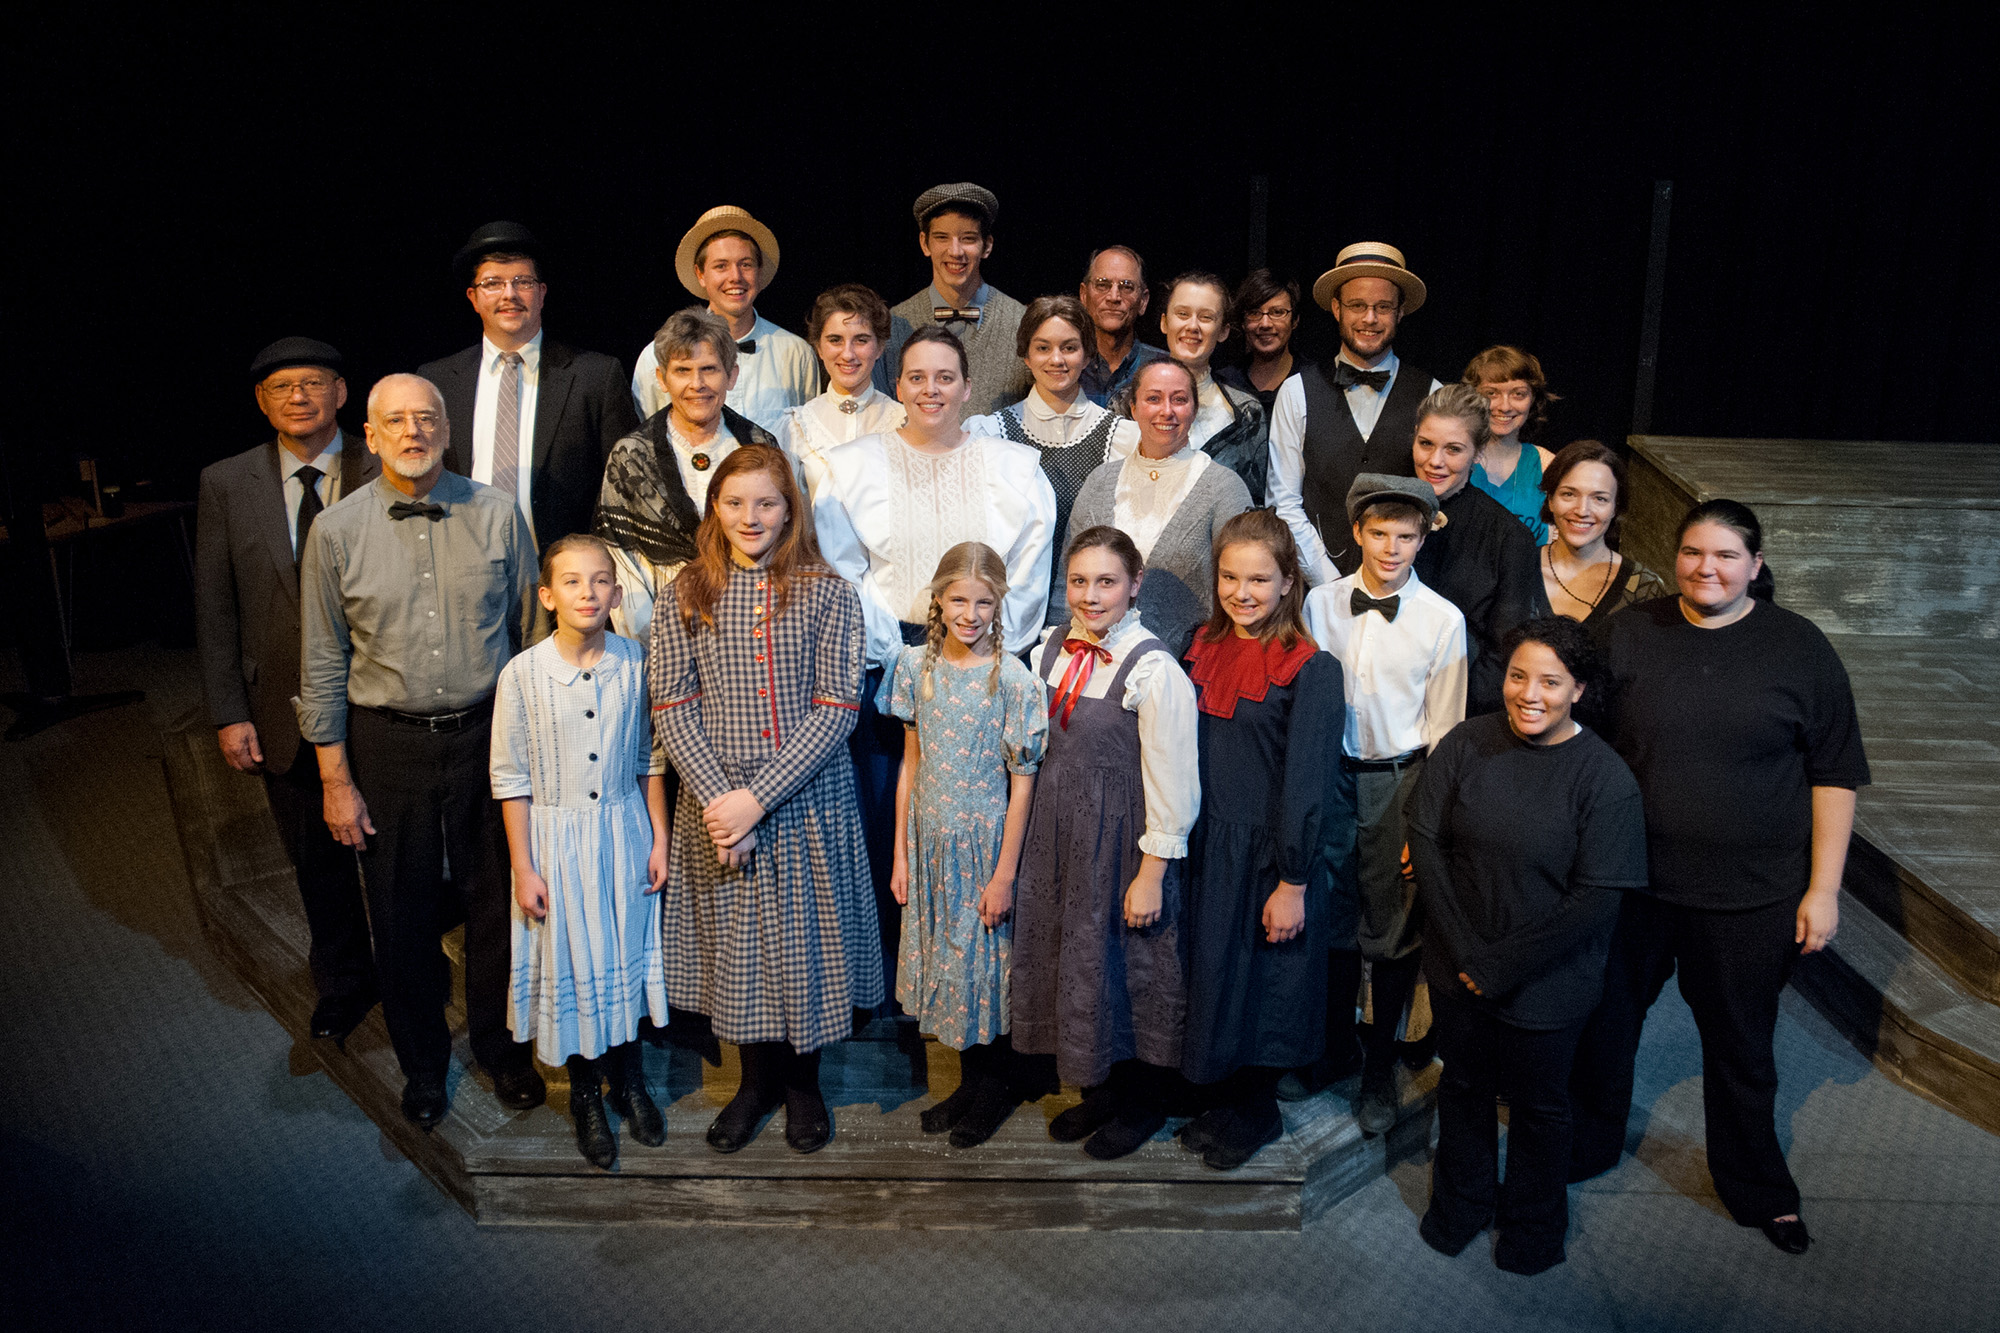 cast and crew photo from the Hesston College production of Our Town